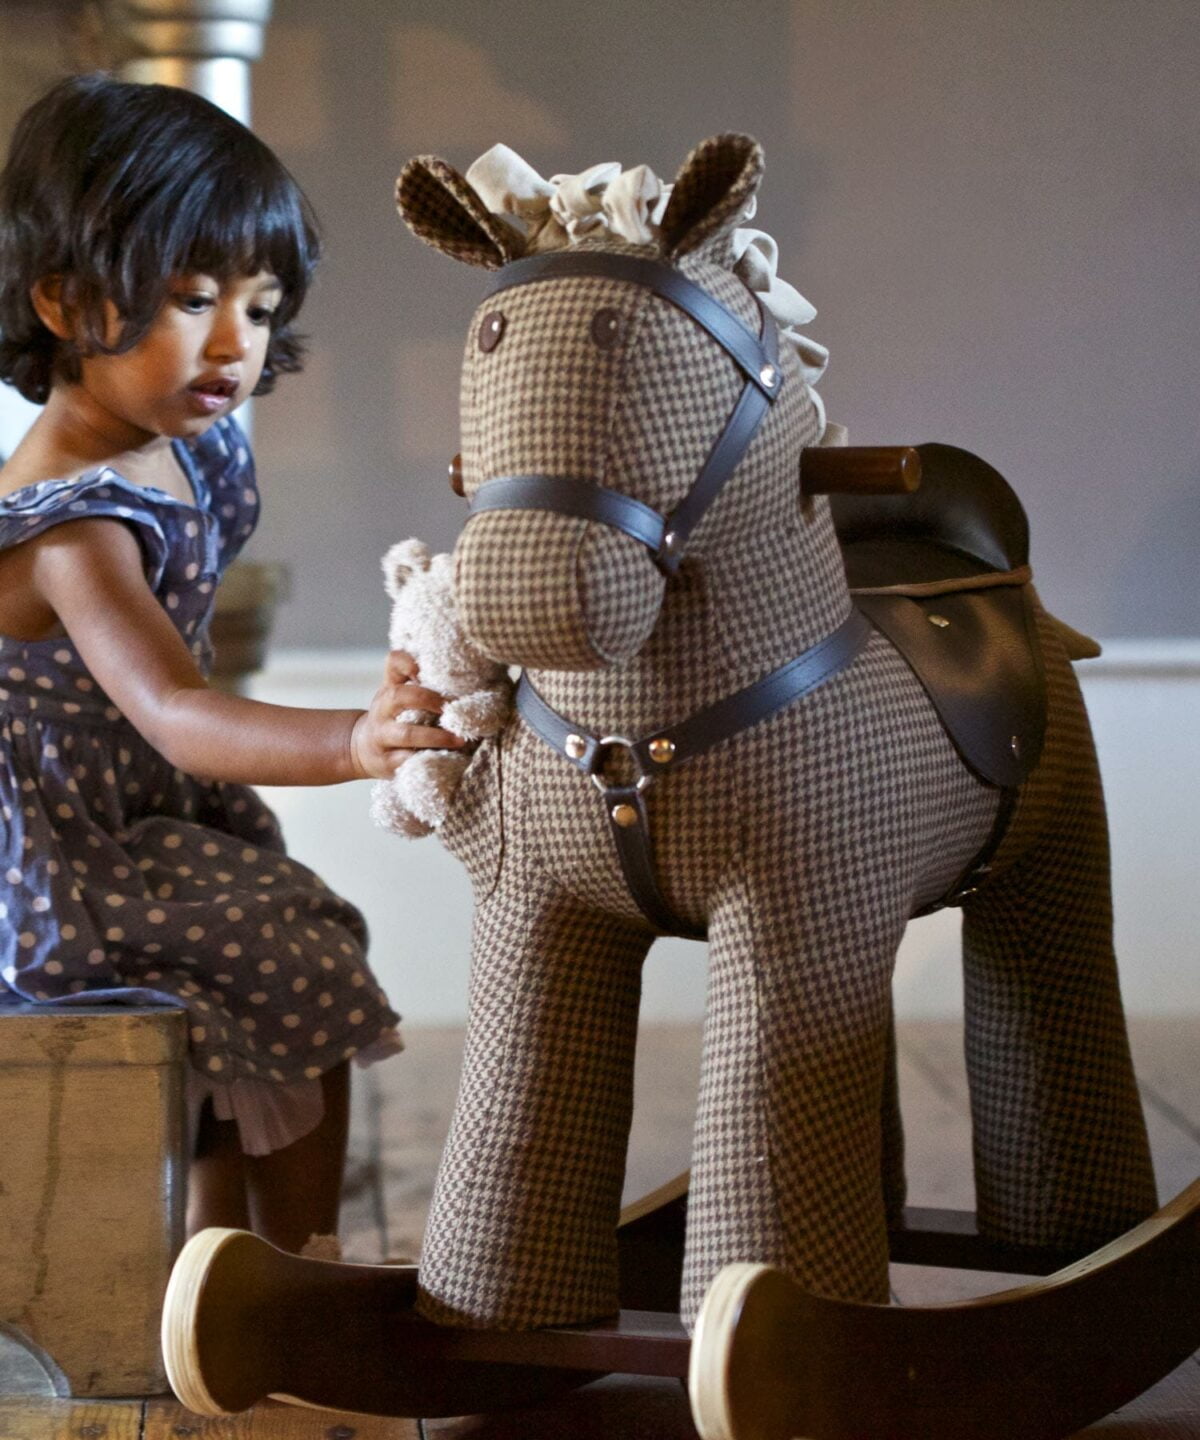 Little girl playing with Chester & Fred Rocking Horse with luxury hounds tooth fabric